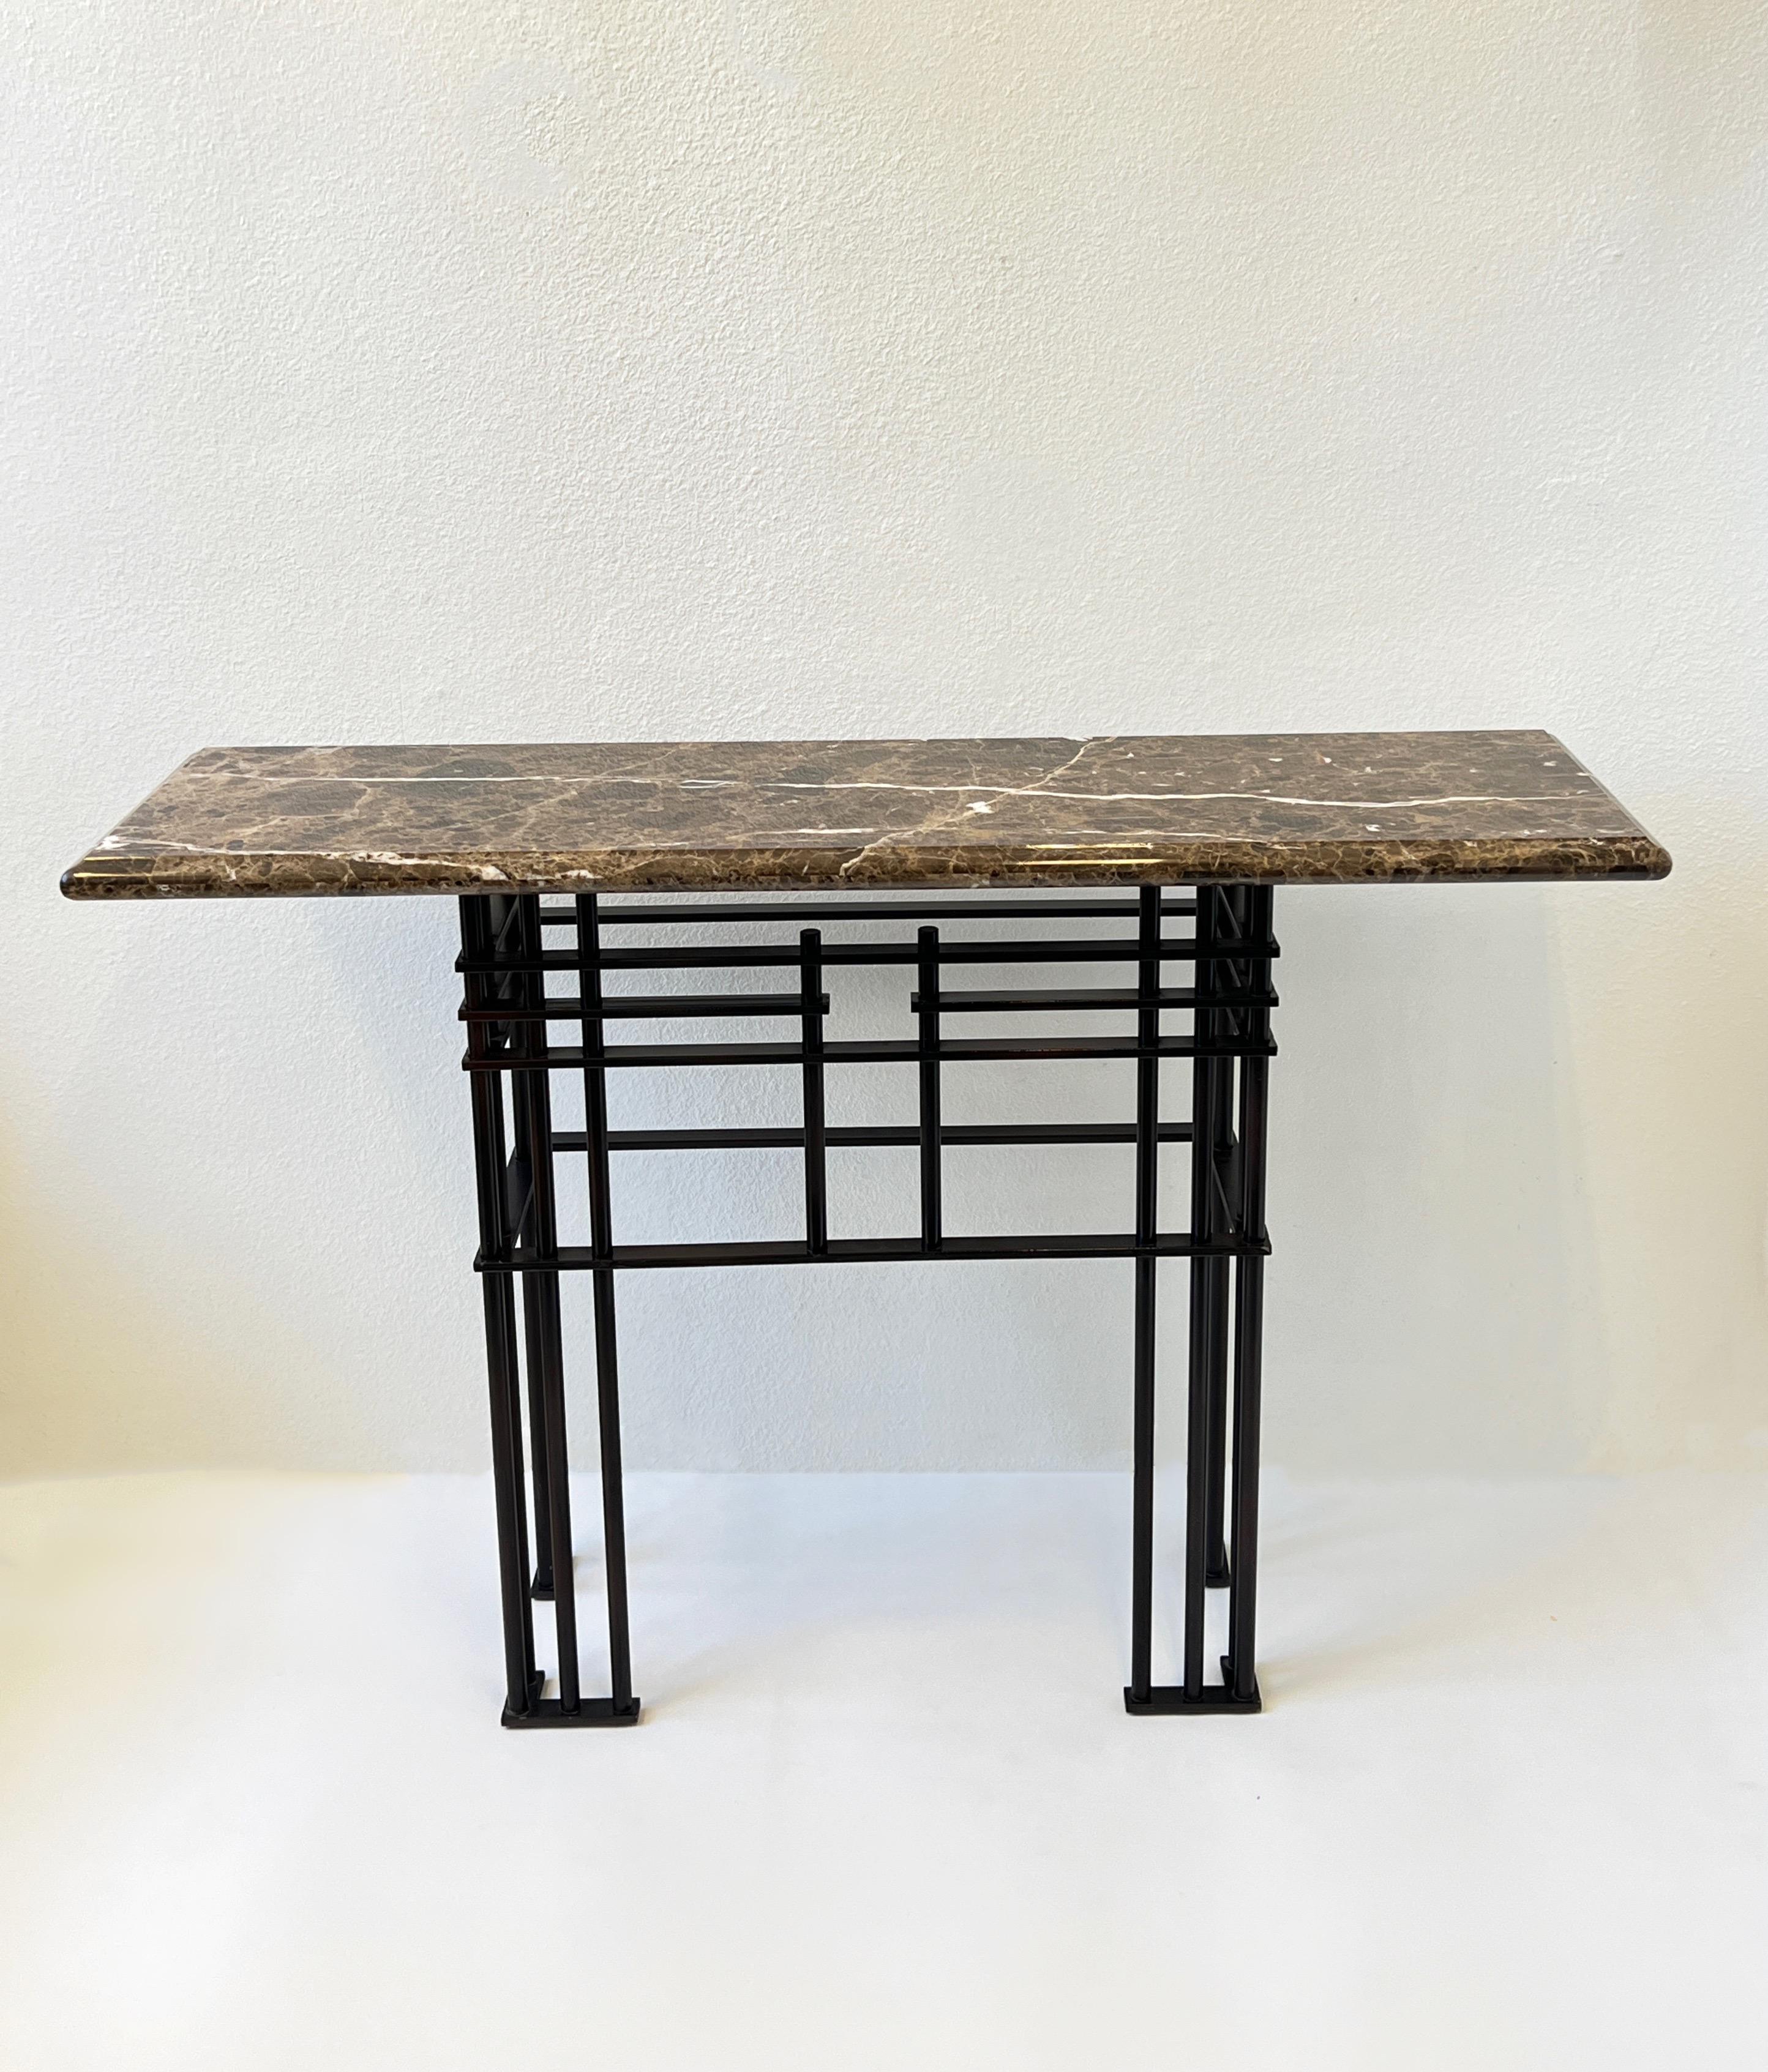 Steel Marble and Bronze Powder Coated Console Table by Jean Michael Wilmotte for Mirak For Sale